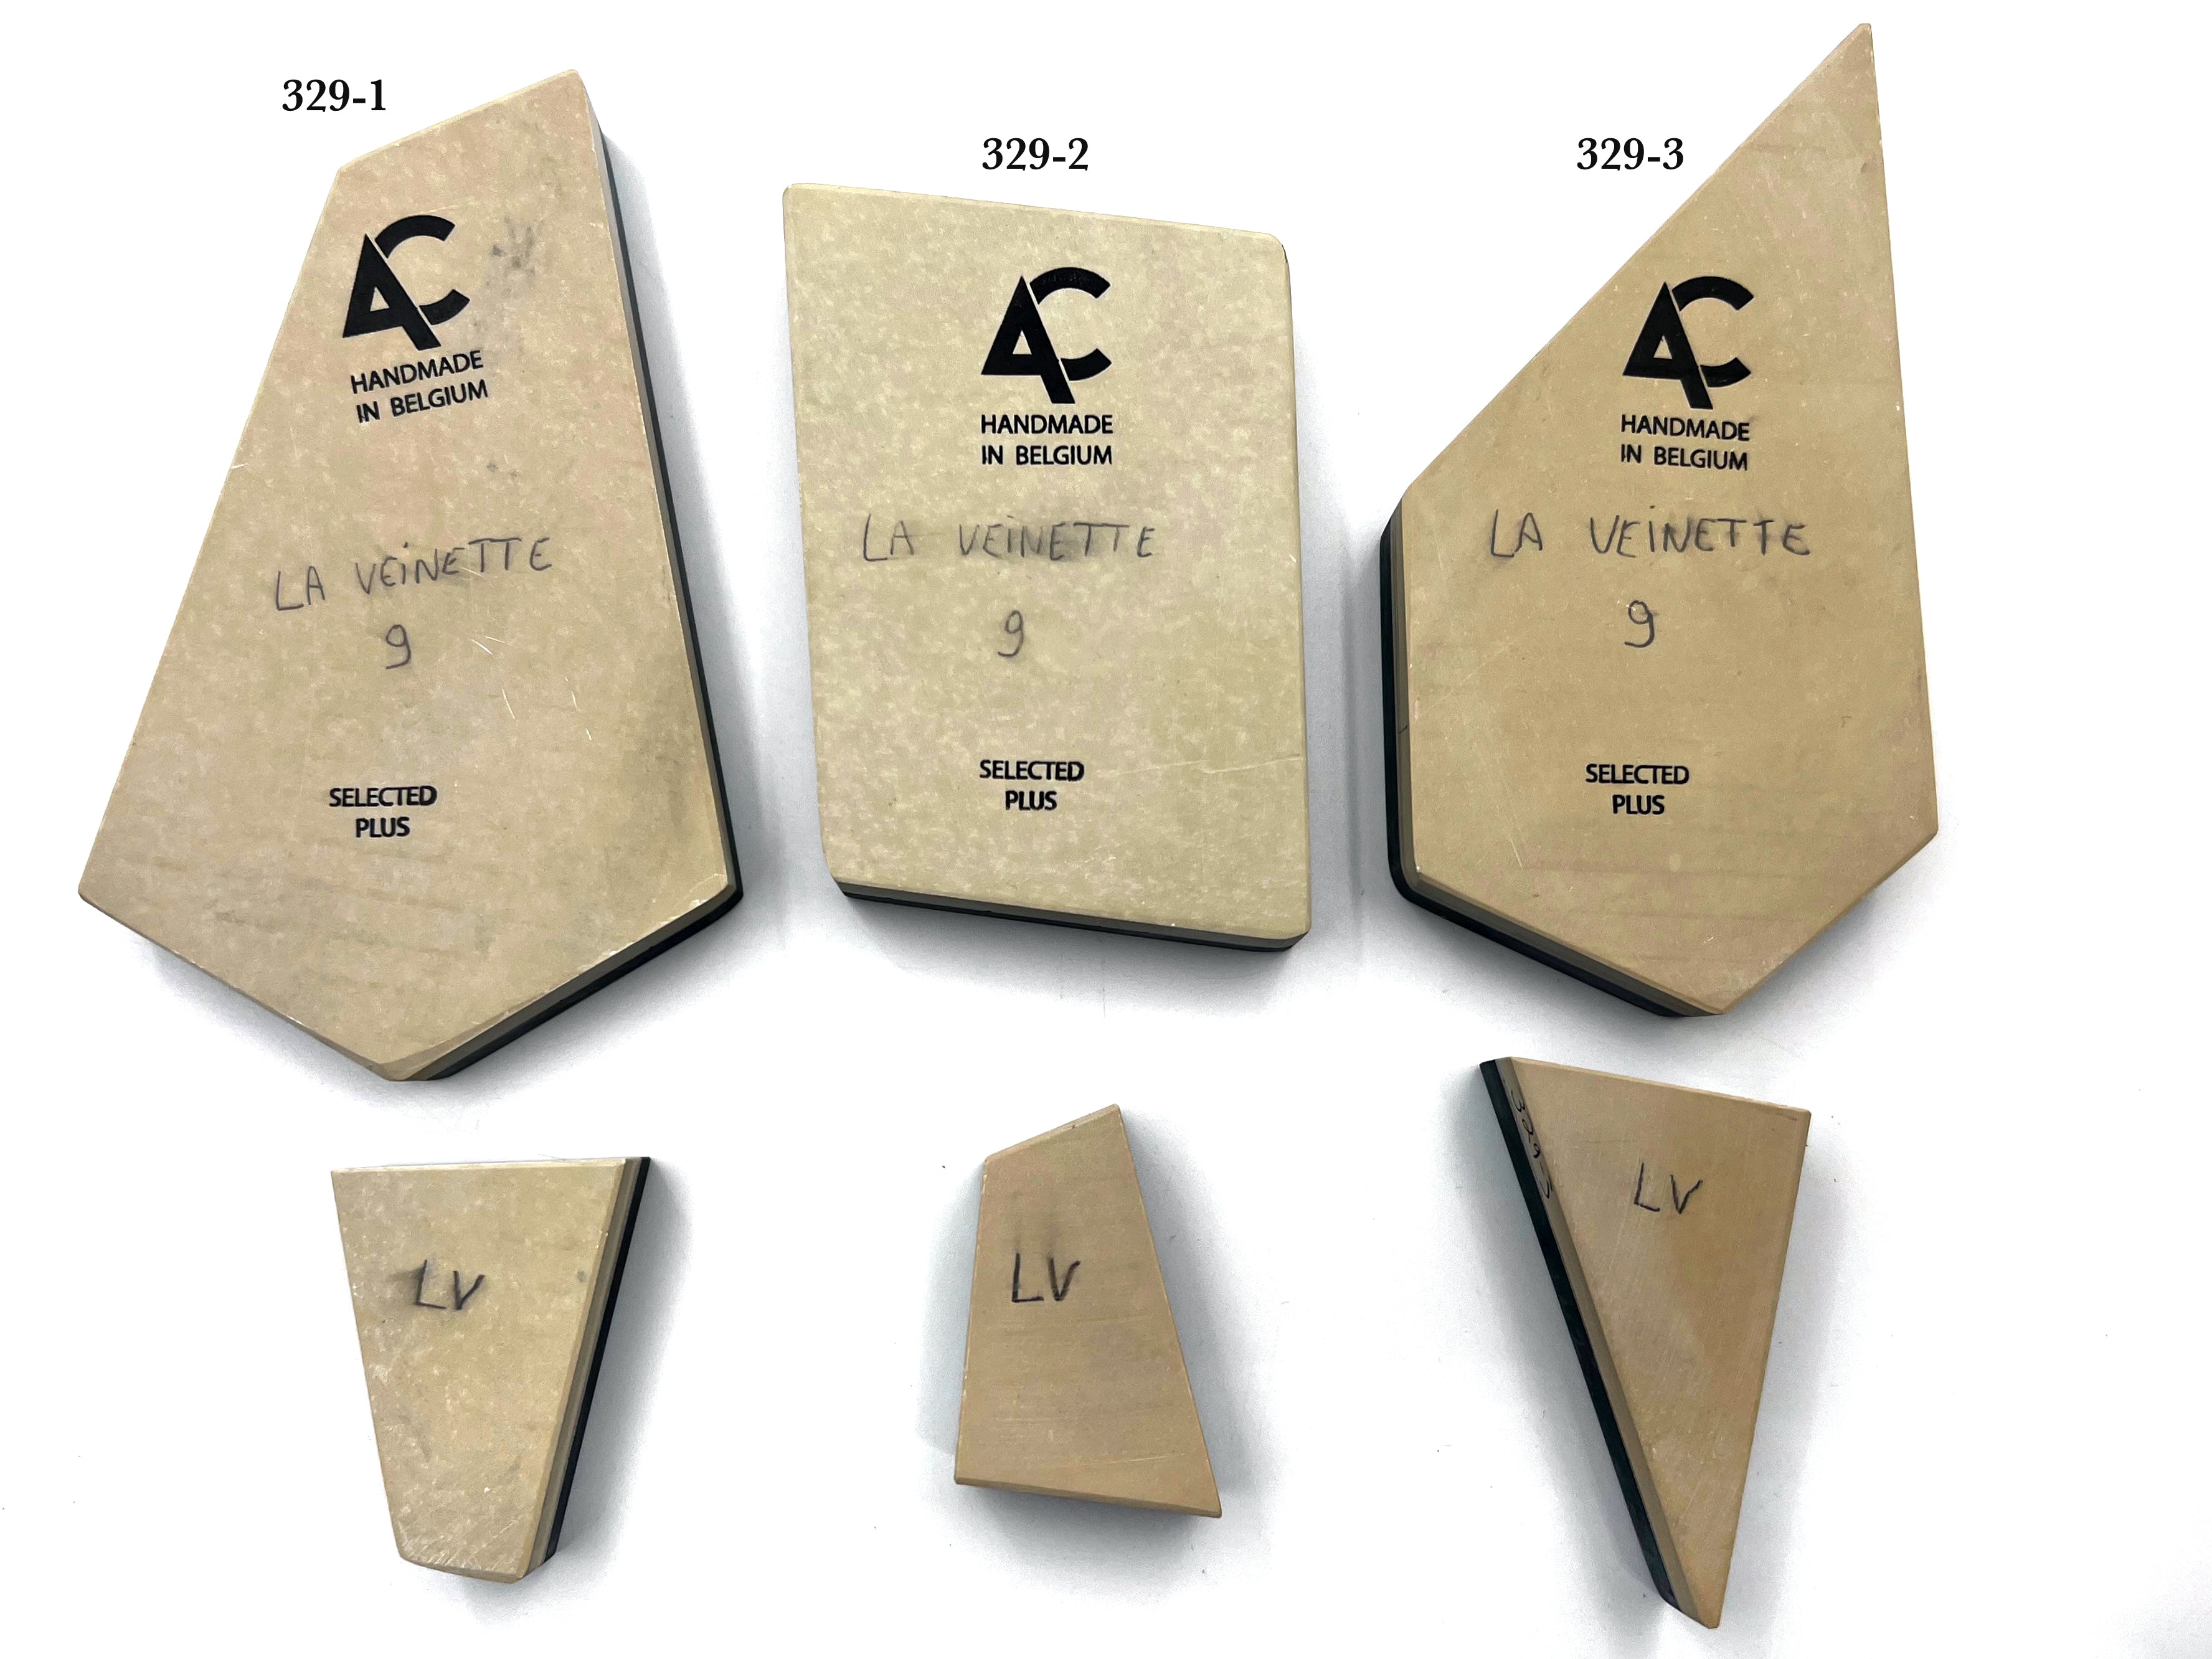 Belgian Coticule La Veinette - Bout 9 Select Plus Sharpening Stone with Slurry Stone - CHOOSE YOUR STONE